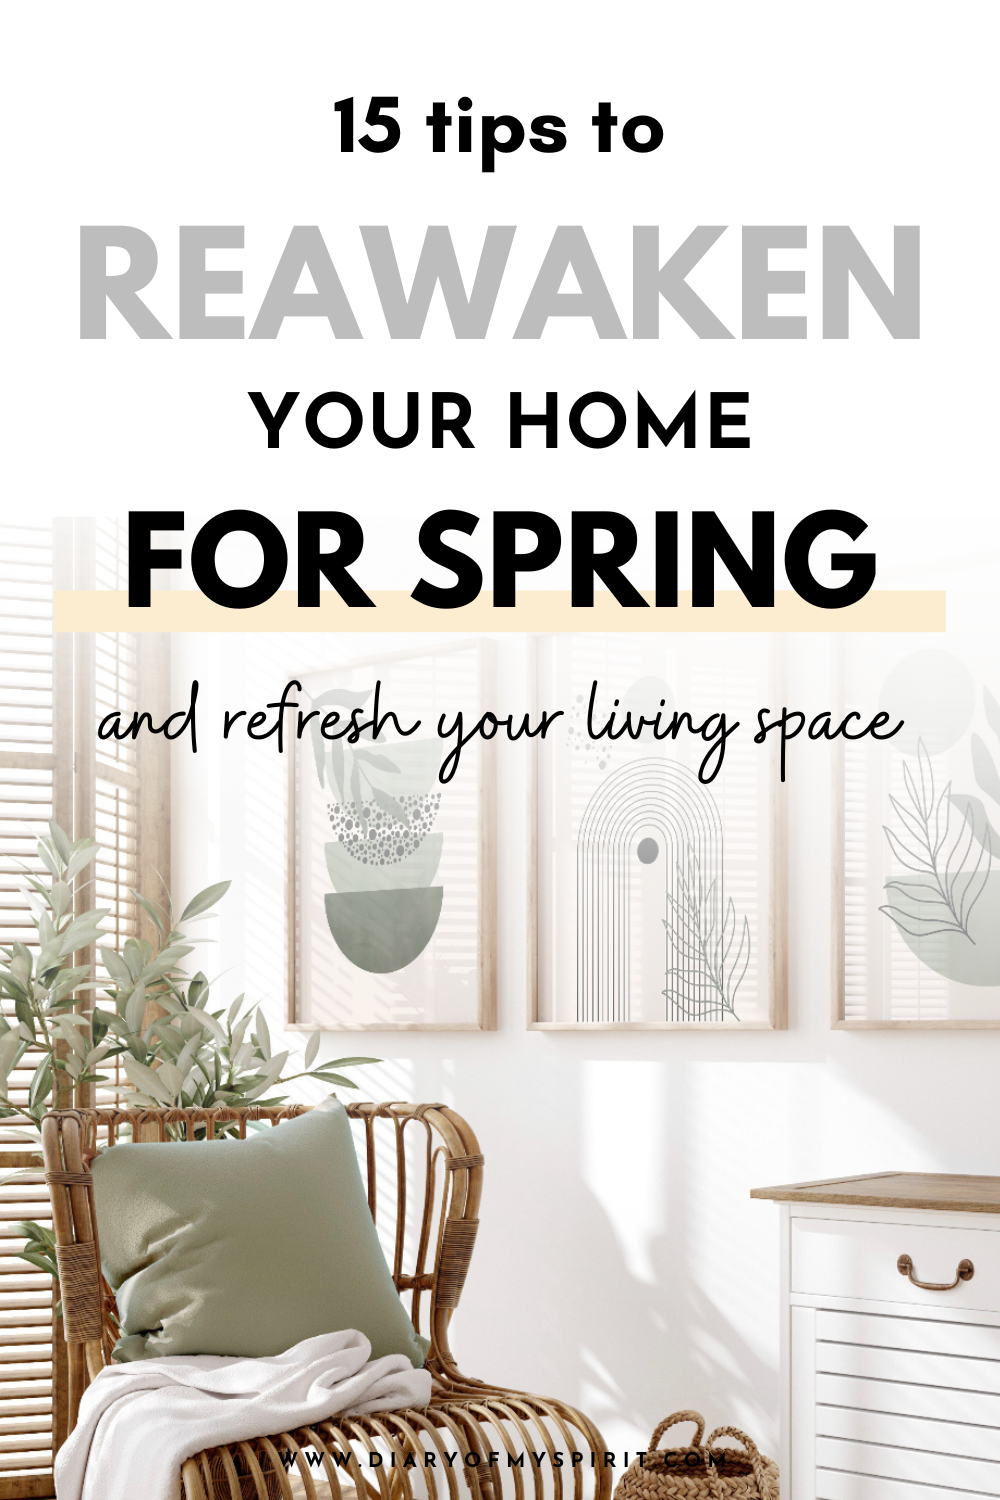 Spring decor ideas. decorating for spring. decor for spring. How to update your home for spring. resfresh home. get home spring ready. how to transition your home from winter to spring